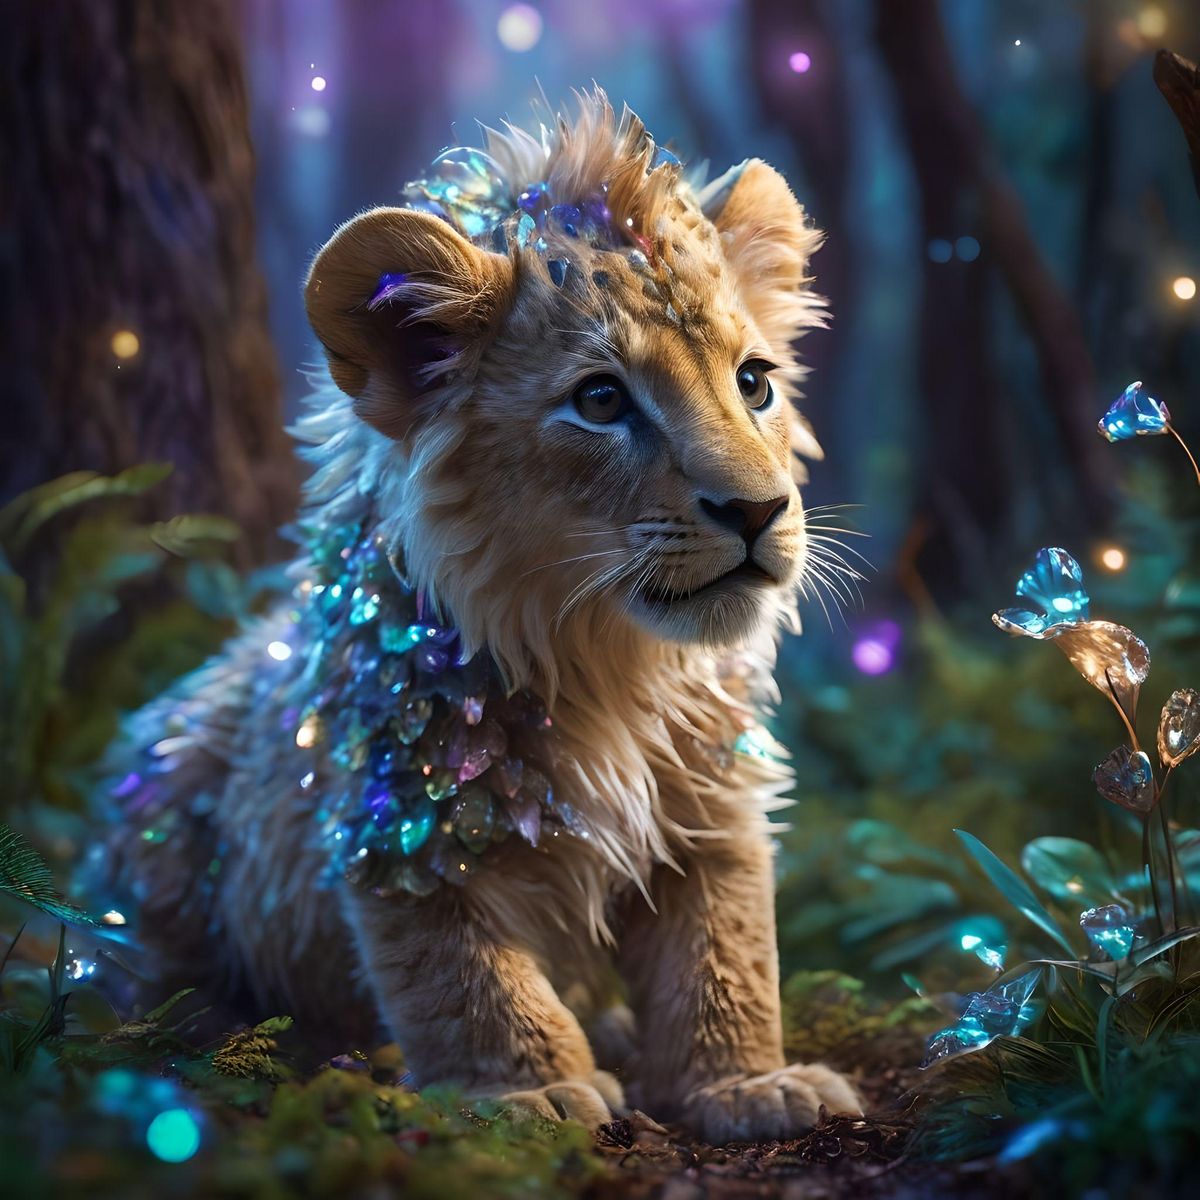 Amidst the ethereal glow of a moonlit clearing, a fantastical baby lion with iridescent scales explores, With its snout rooting out hidden treasures, it brings a touch of magic to the enchanted forest, its scales reflecting the colors of the shimmering crystals that litter the ground, intricate detaild, hyper realistic, 8k